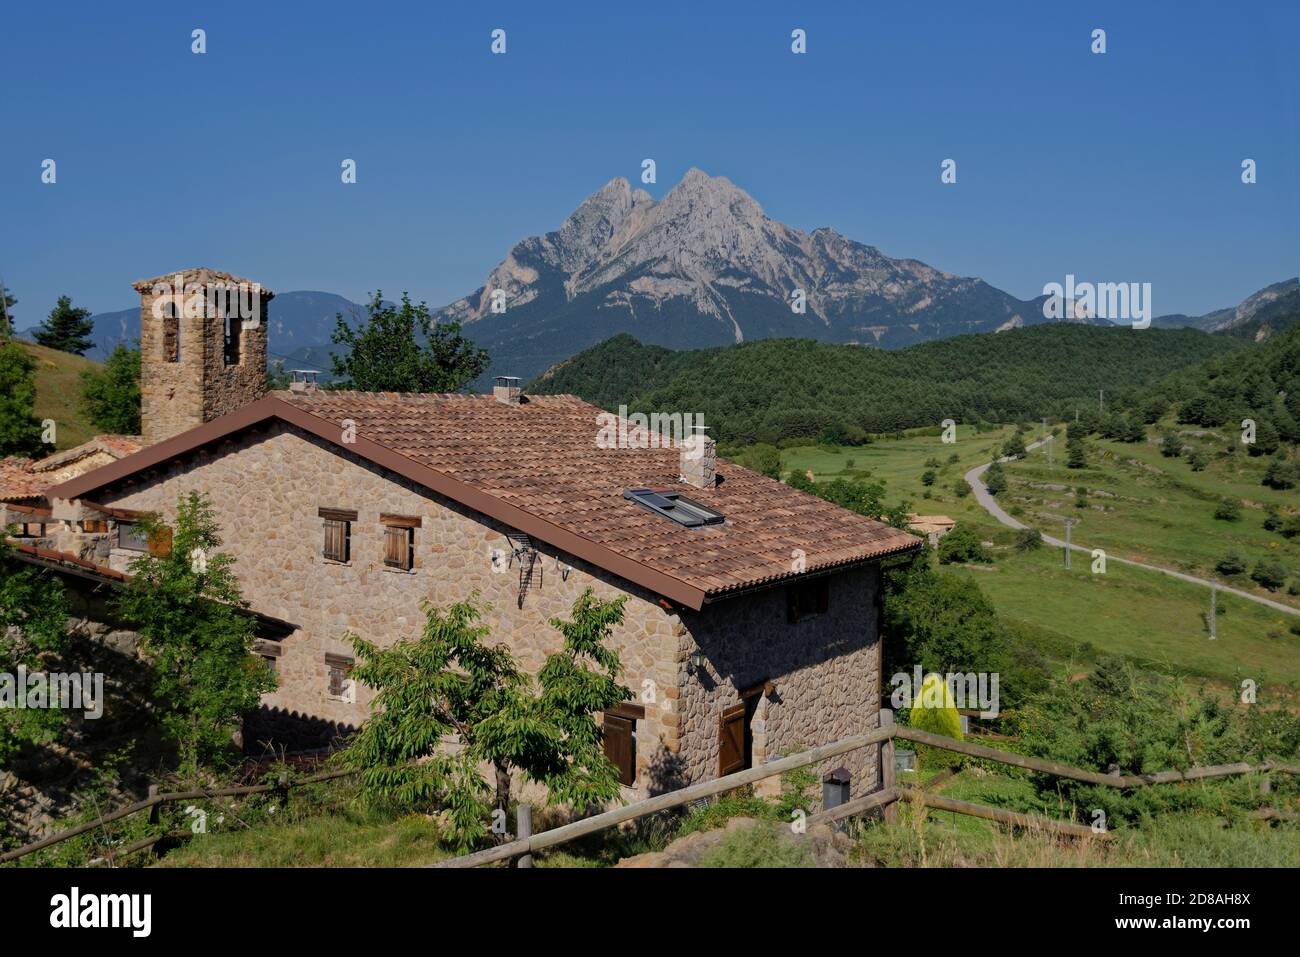 A house in a small town with Pedraforca mountain in the background. Stock Photo